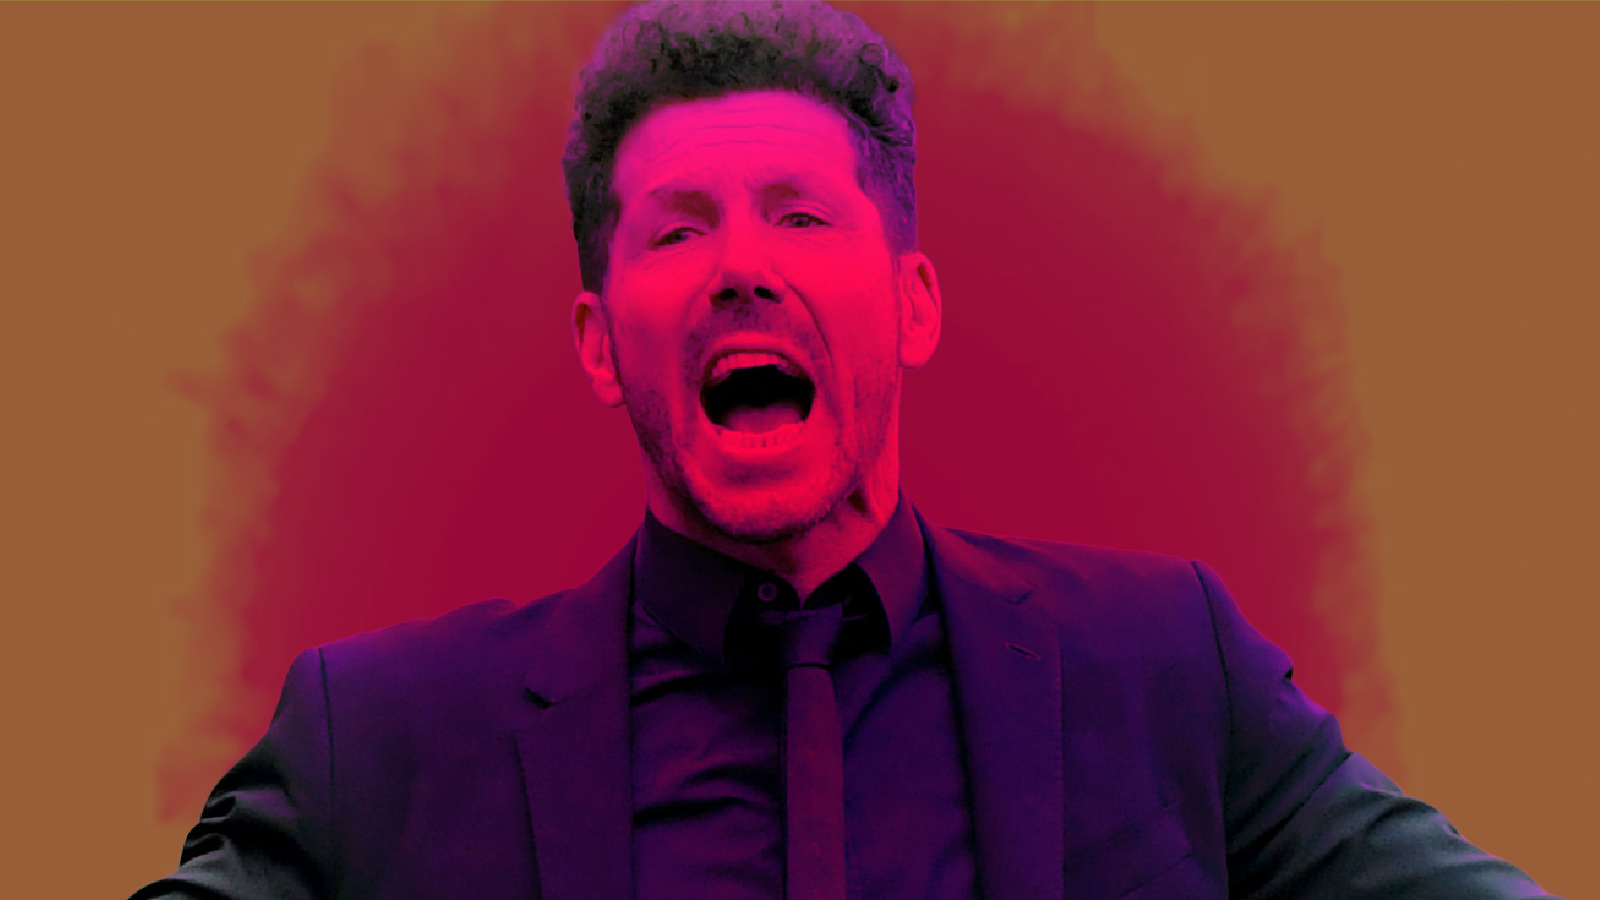 Diego Simeone giving a passionate reaction